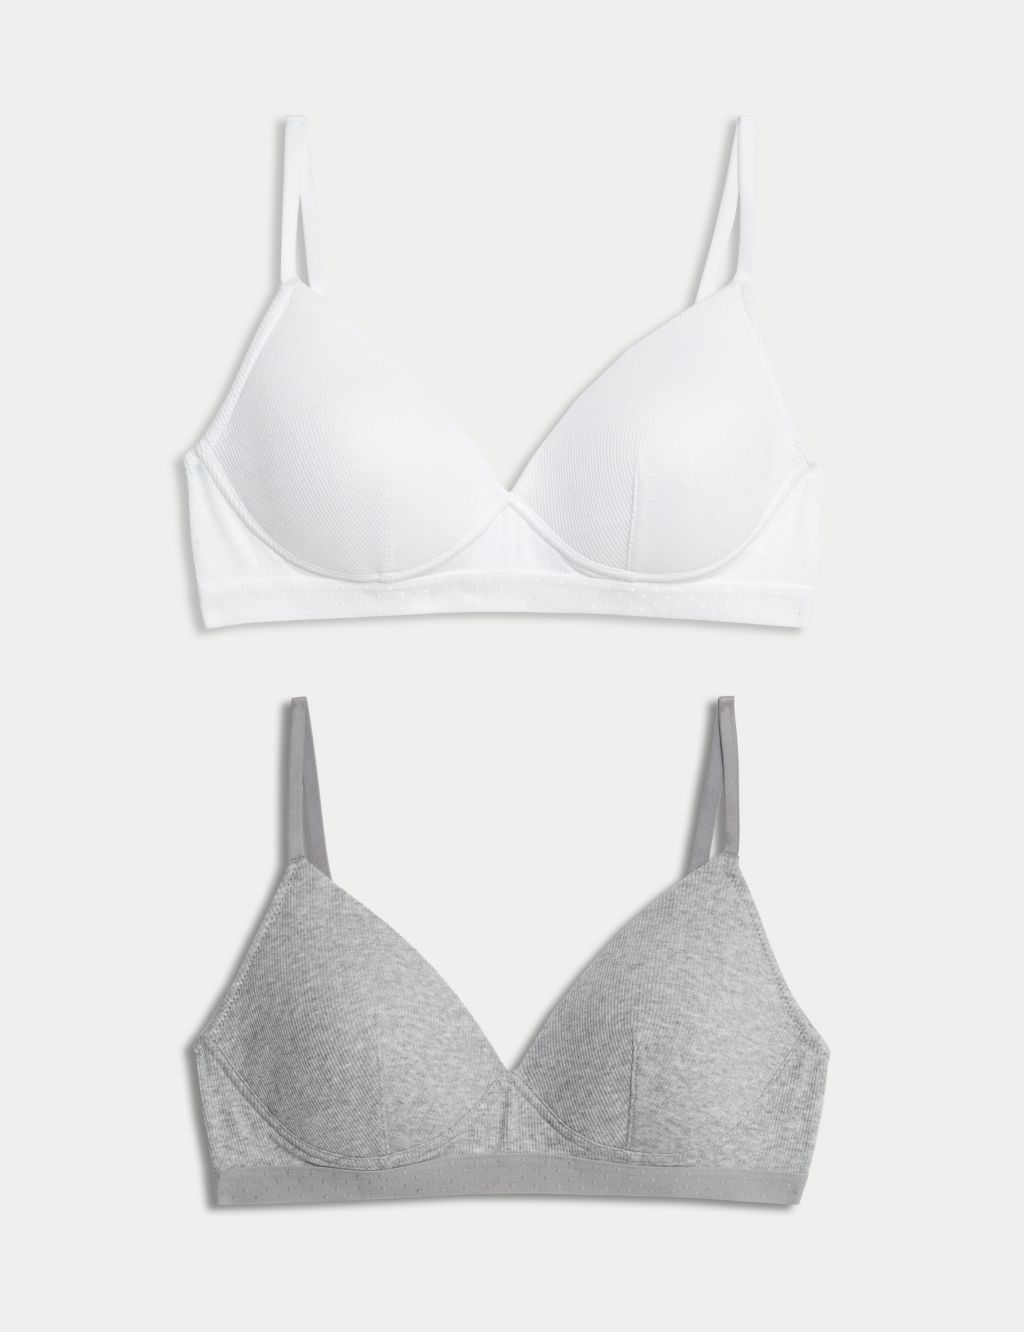 M&S - Chesterfield - Our first bras are simple, supportive and specially  designed for pre-teens ✨ Angel bras provide gentle support for developing  bodies and a smooth, seamless finish beneath clothes. it's